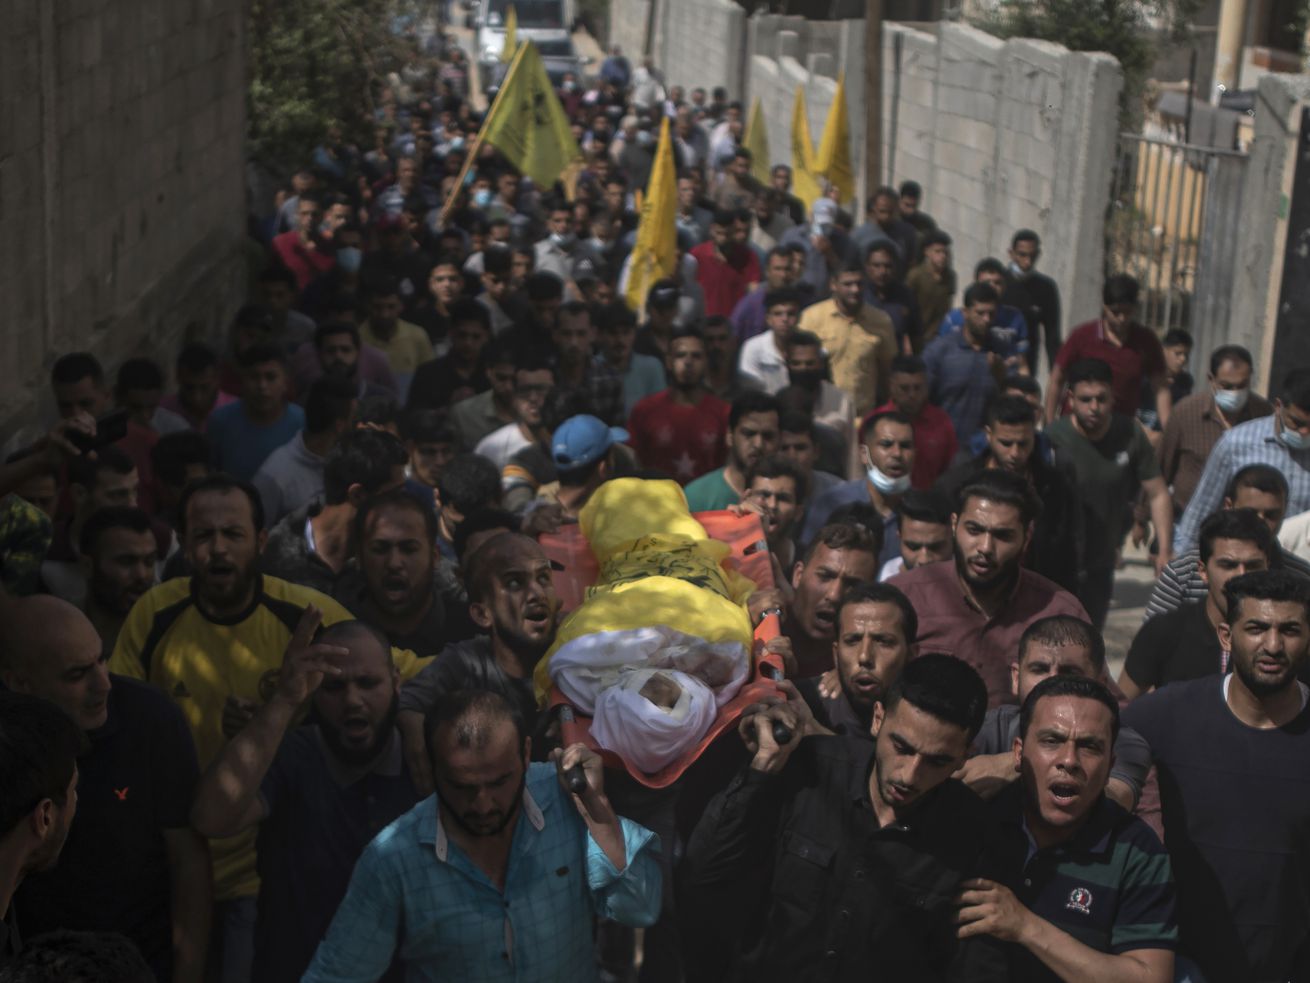 Palestinian mourners carry the body of 11-year-old Hussain Hamad, who was killed by an explosion during the ongoing conflict between Israel and Hamas, during his funeral in Beit Hanoun, northern Gaza Strip, Tuesday, May 11, 2021.